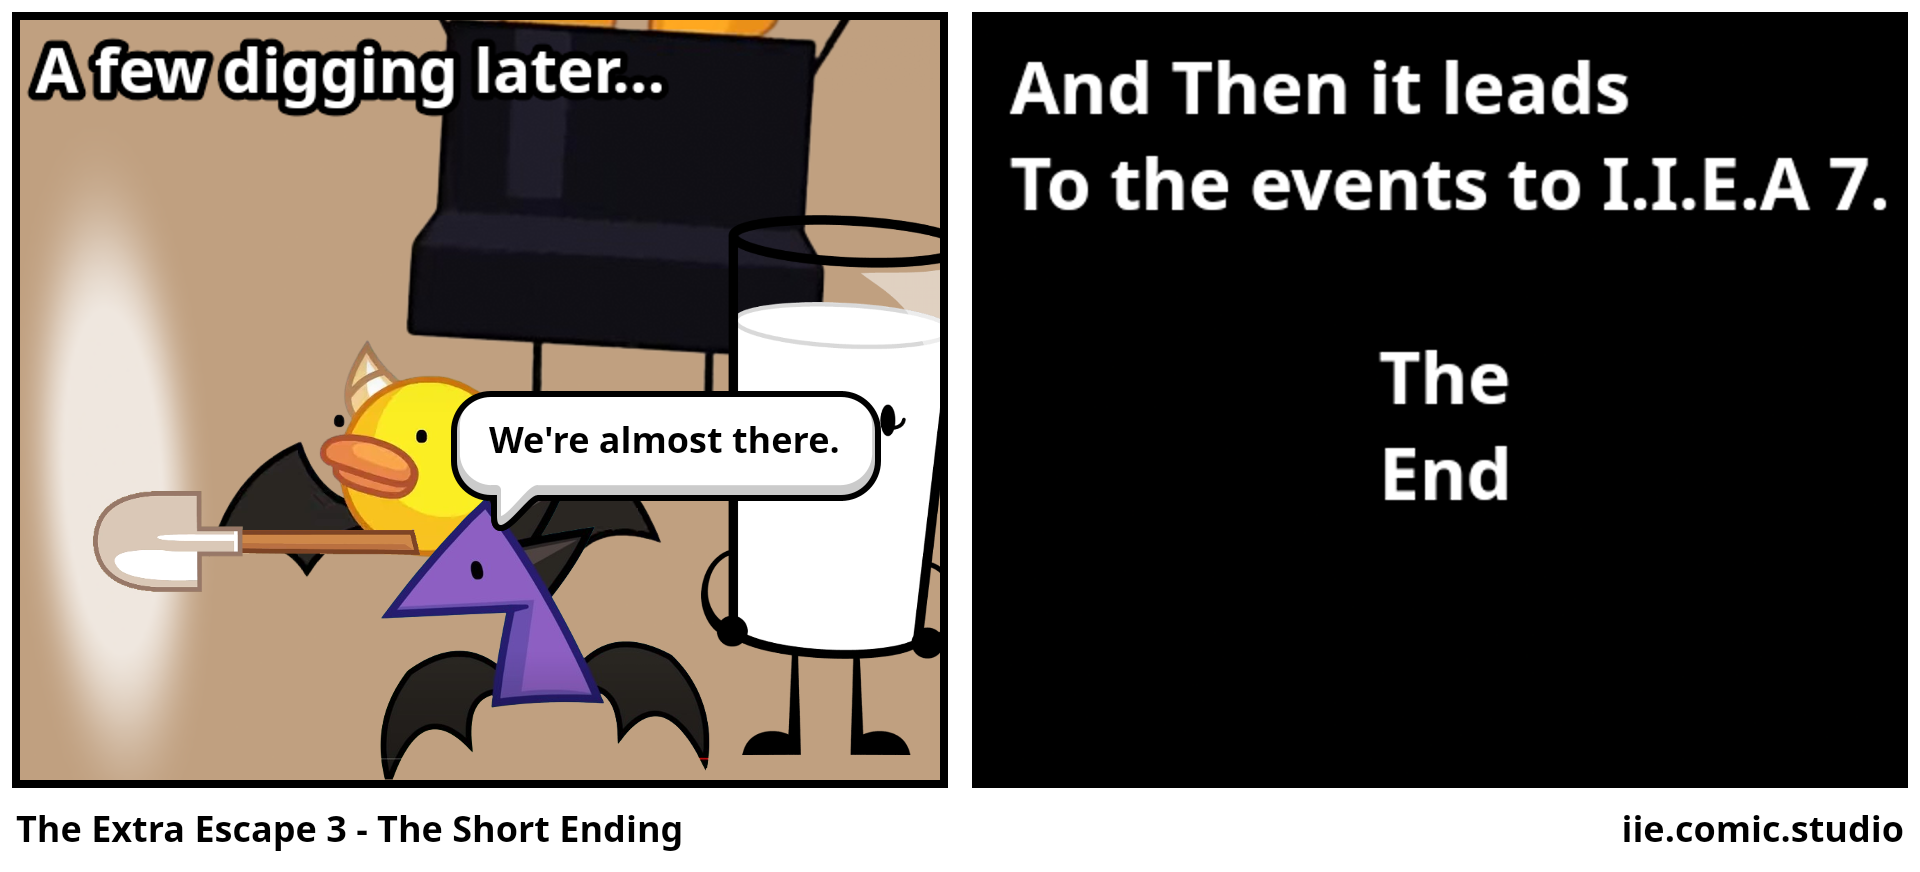 The Extra Escape 3 - The Short Ending